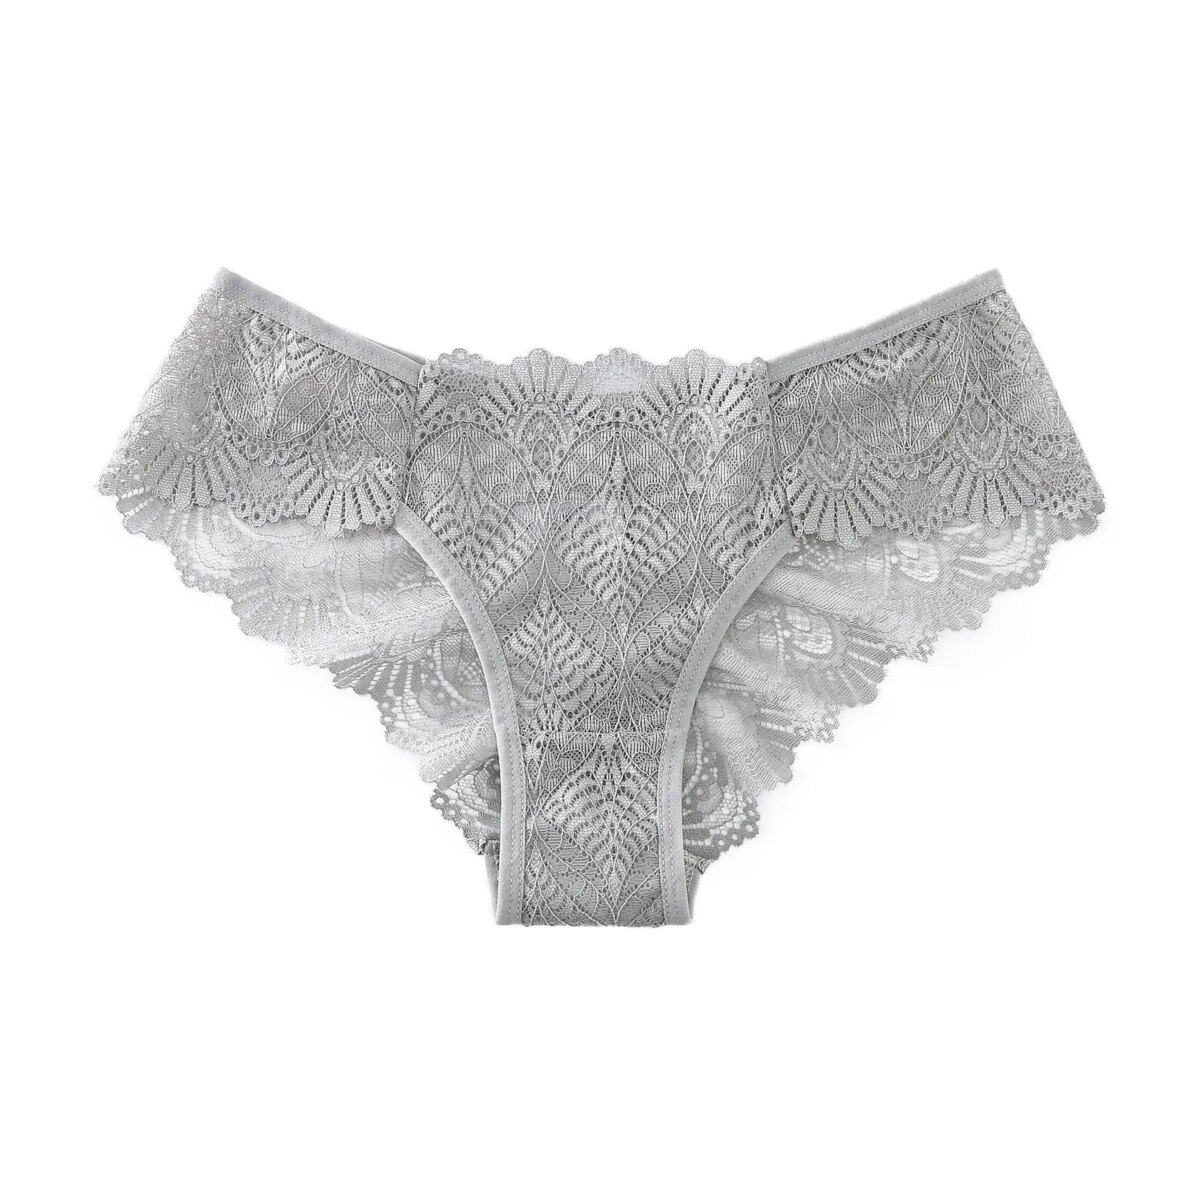 Graceful Sensuality: Elevate Your Intimates Collection with Our Lace Ladies' Underwear!